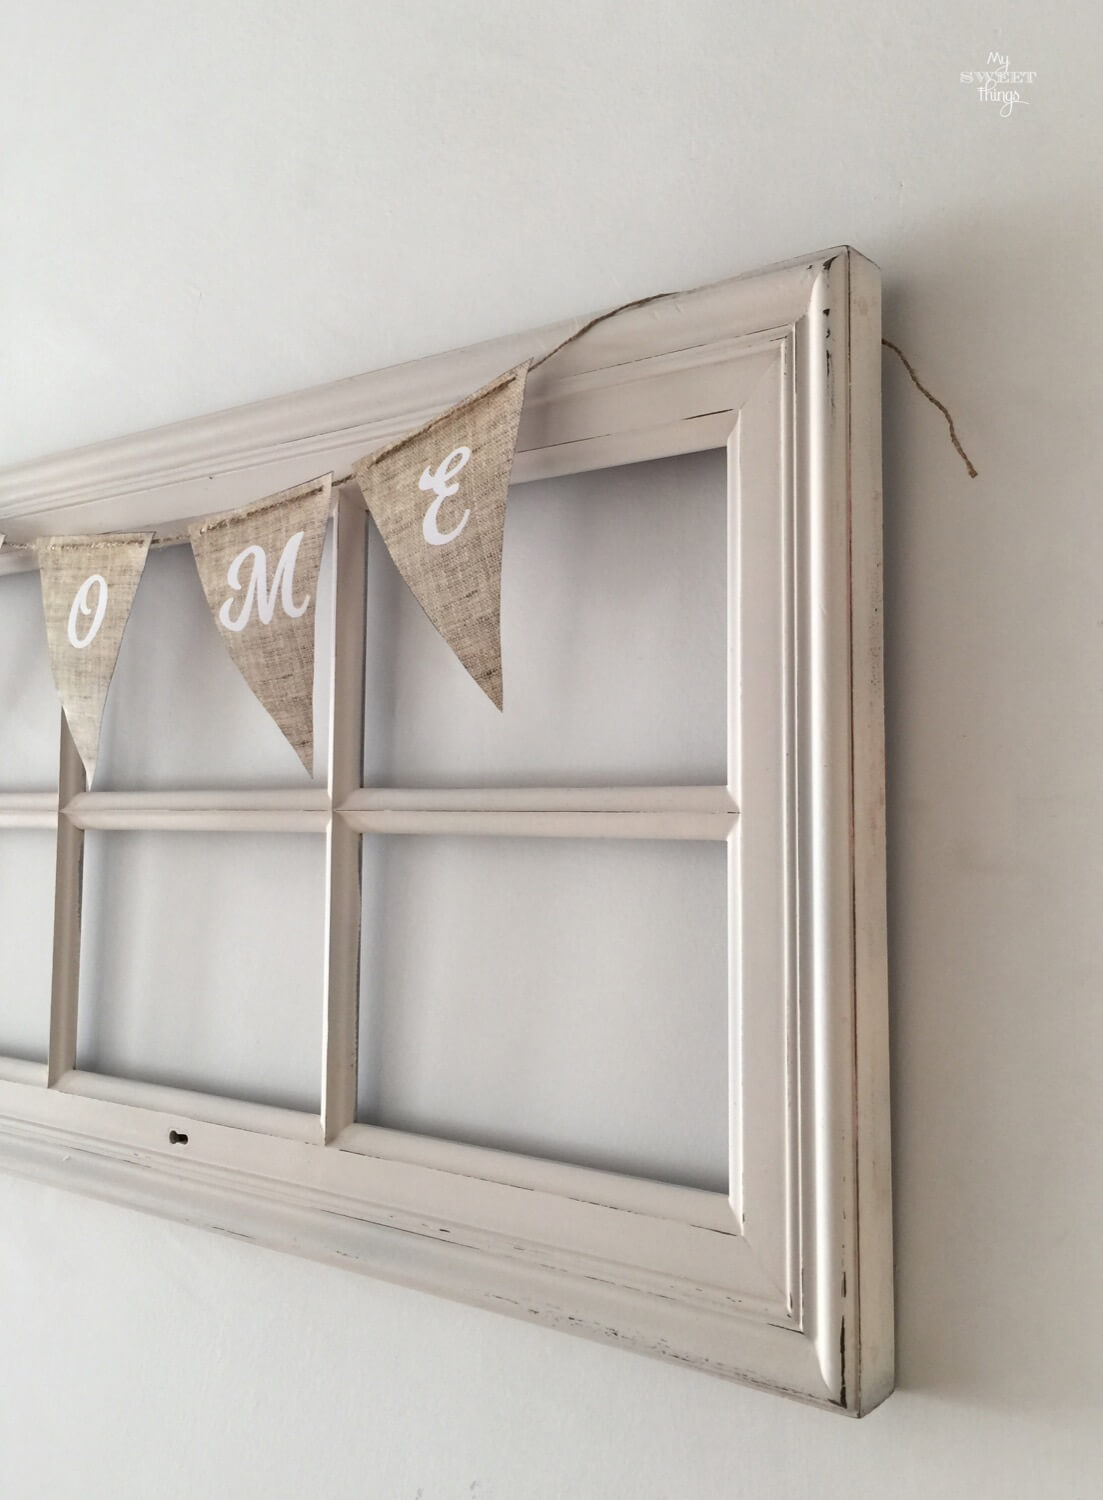 Old windows repurposed into home decor with pennant banner · Via www.seethings.net